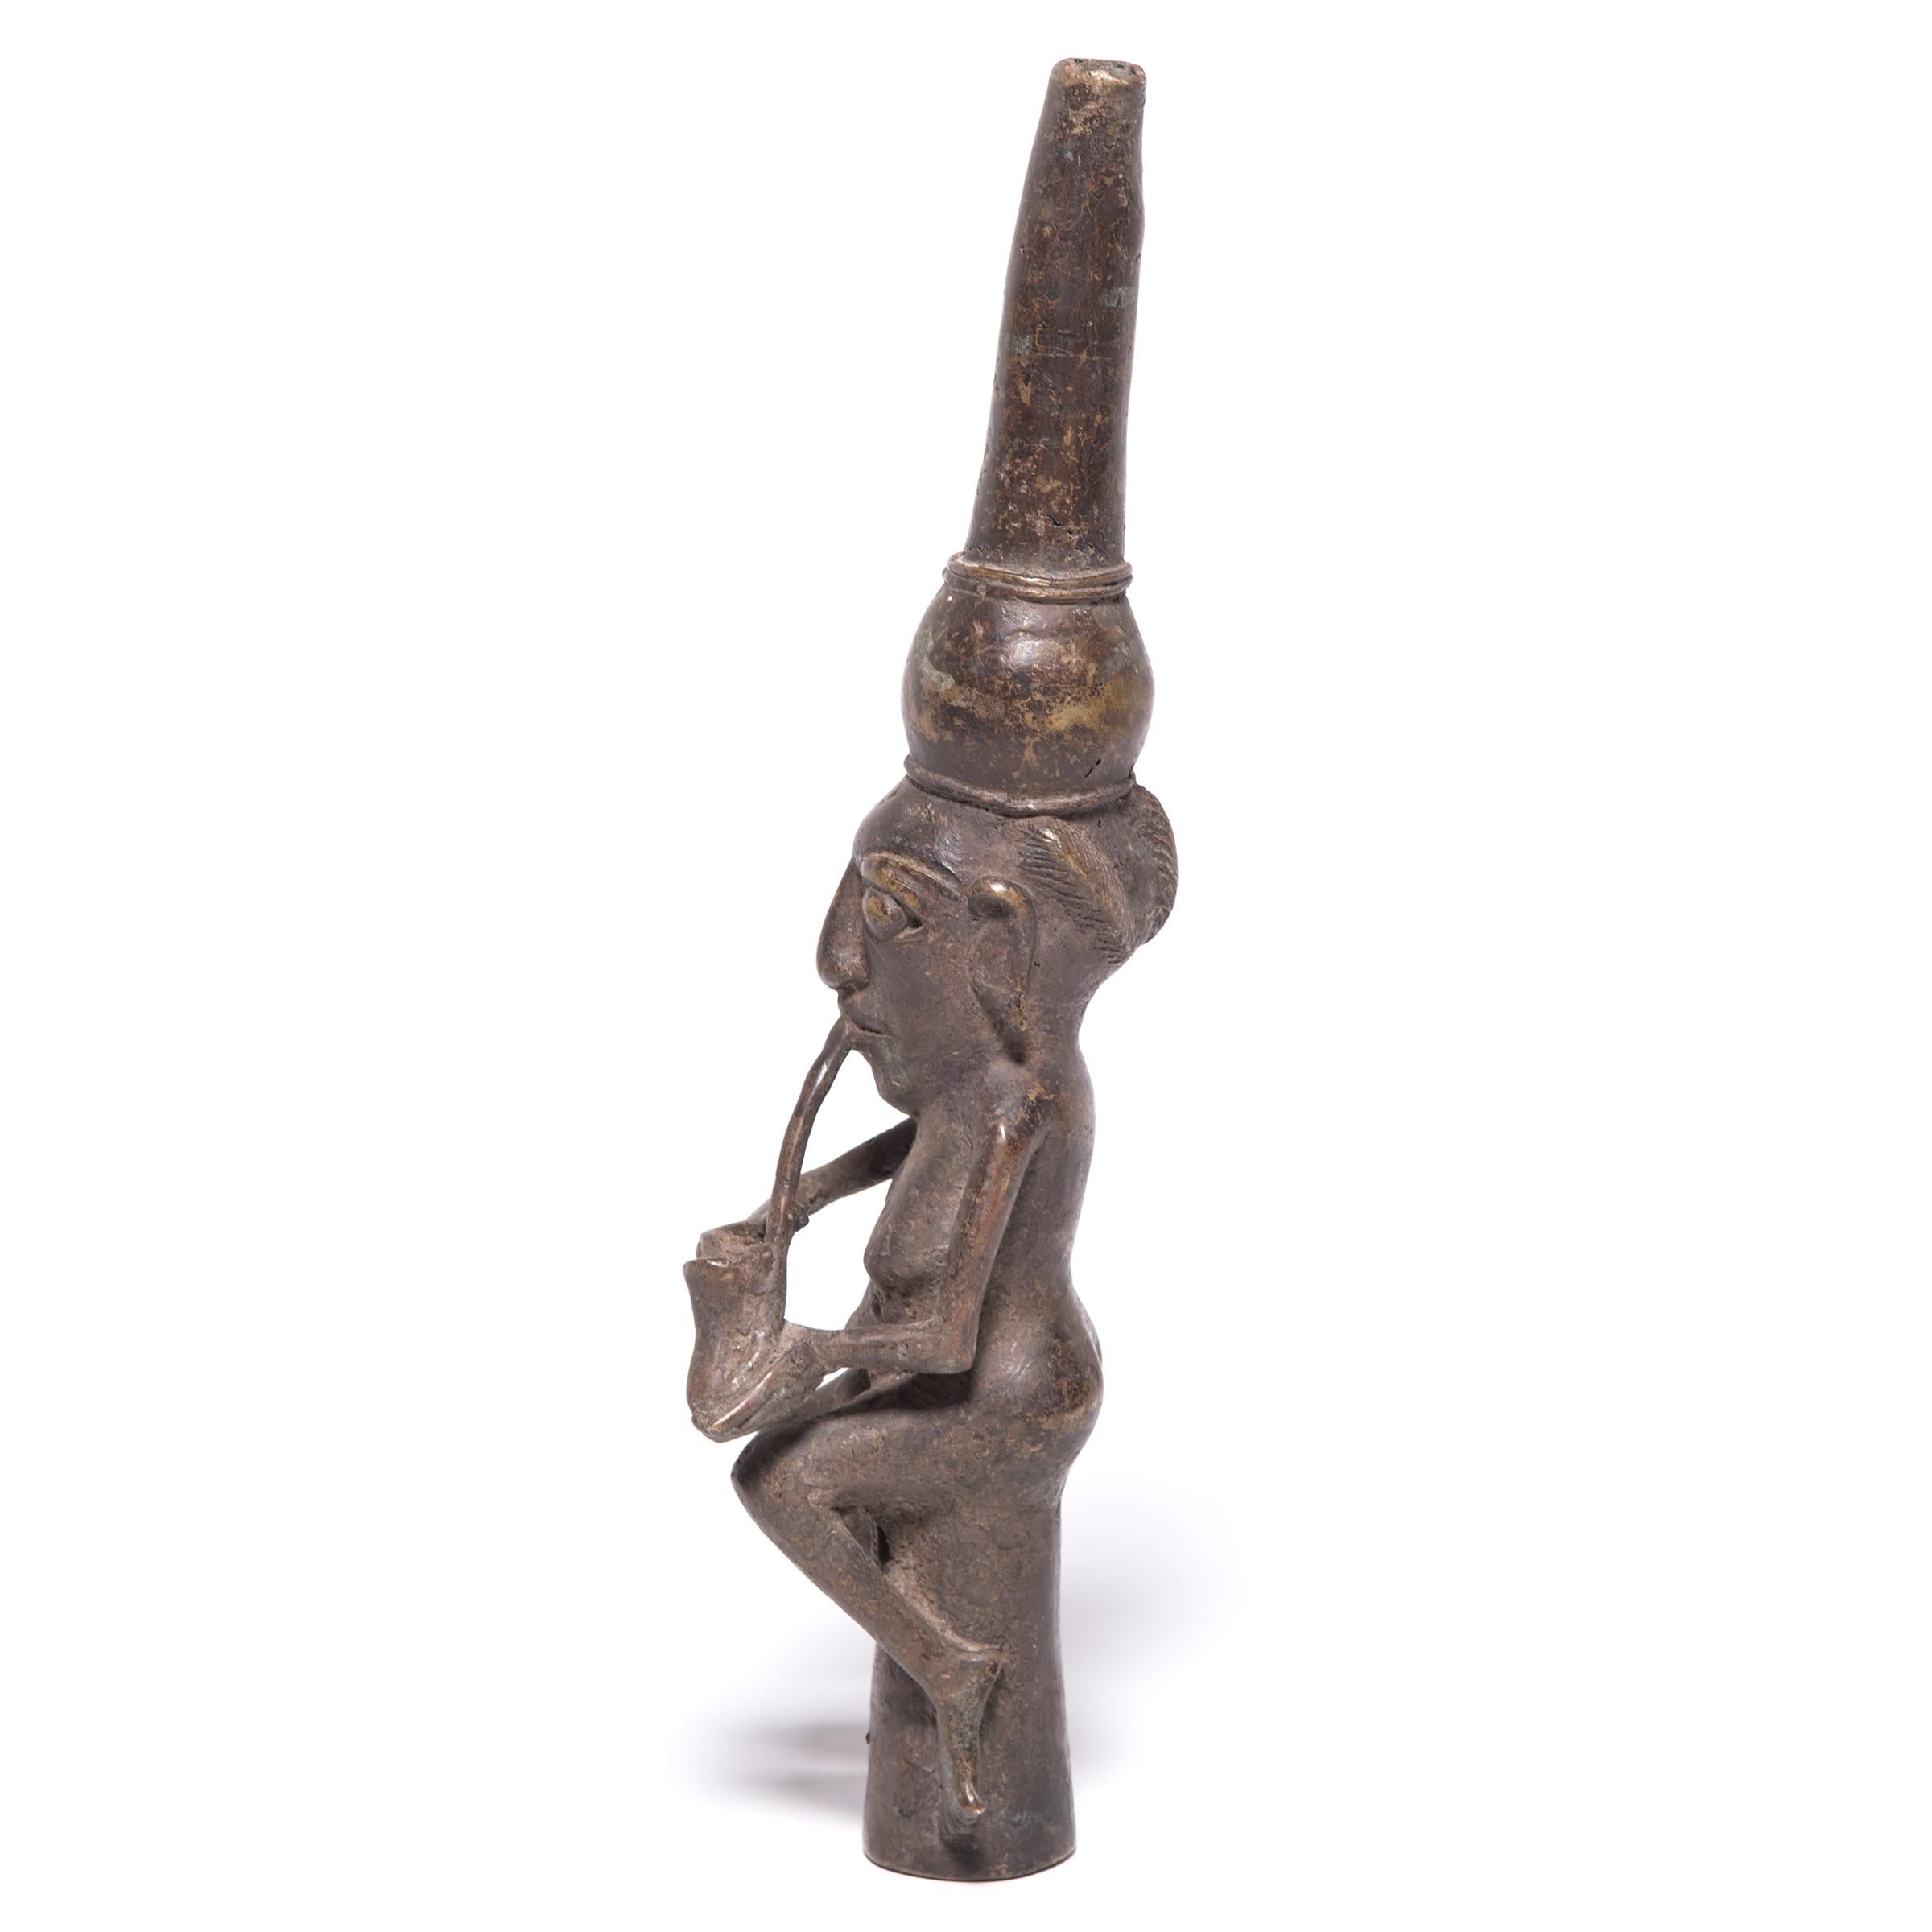 World-renowned for high-quality lost wax casting, the city of Benin in West Africa has been a leading producer of fine cast brass and bronze sculptures since as early as the 16th century. Most Benin bronze objects were commissioned specifically for